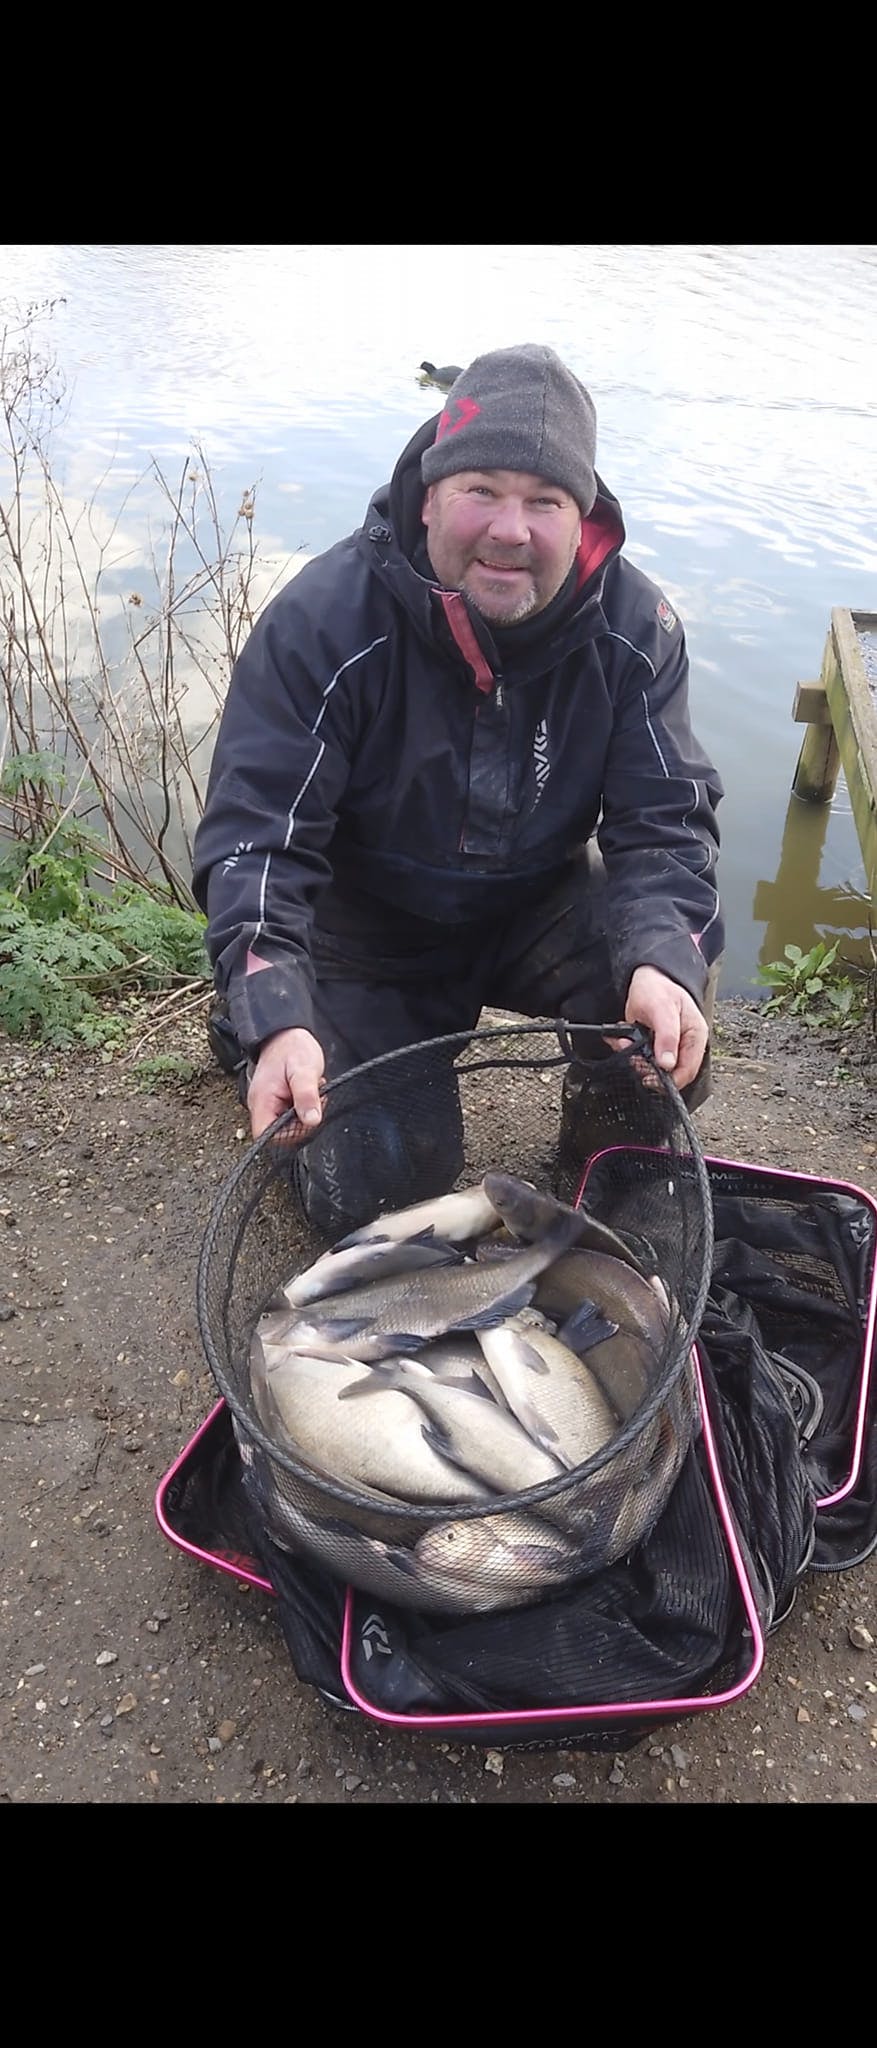 Raison bags near 100lb net of silvers in latest match | Angling Times